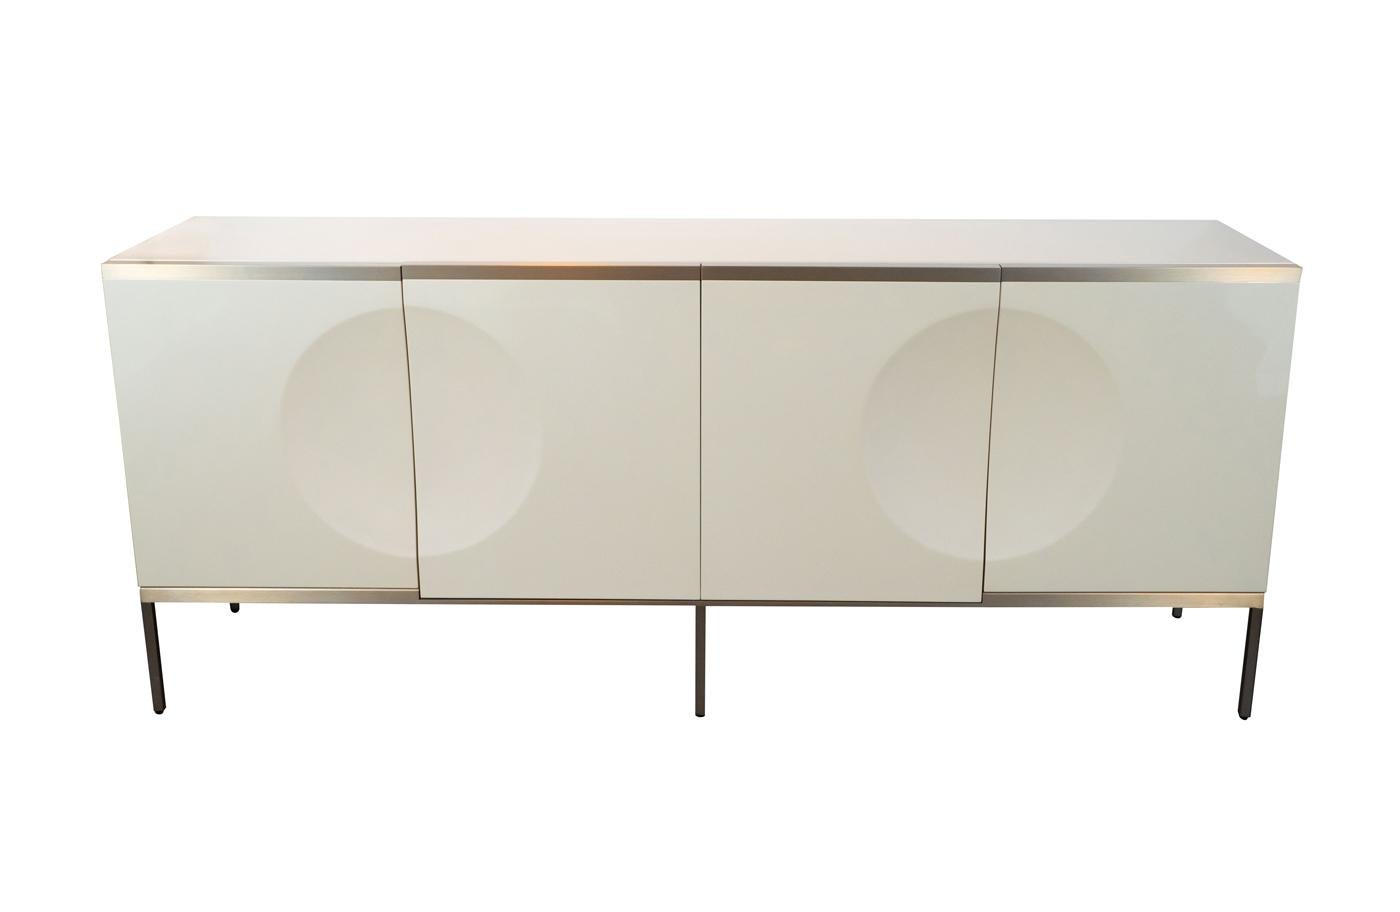 High gloss metallic lacquer with satin metallic concave circle details. Four doors with four adjustable shelves, light satin bronze base and details.